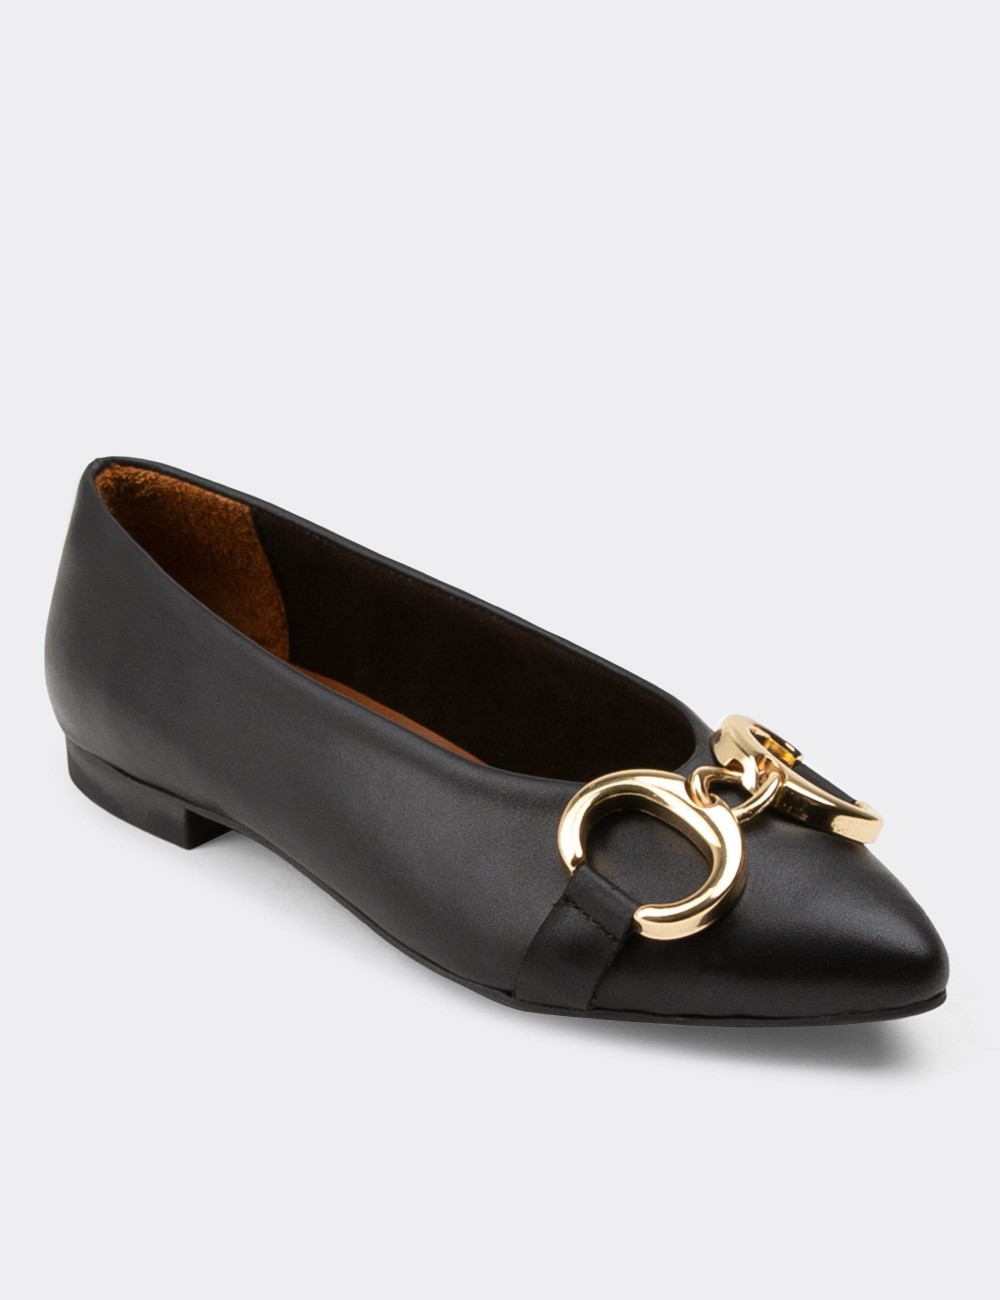 Black  Leather Loafers - 01916ZSYHC03